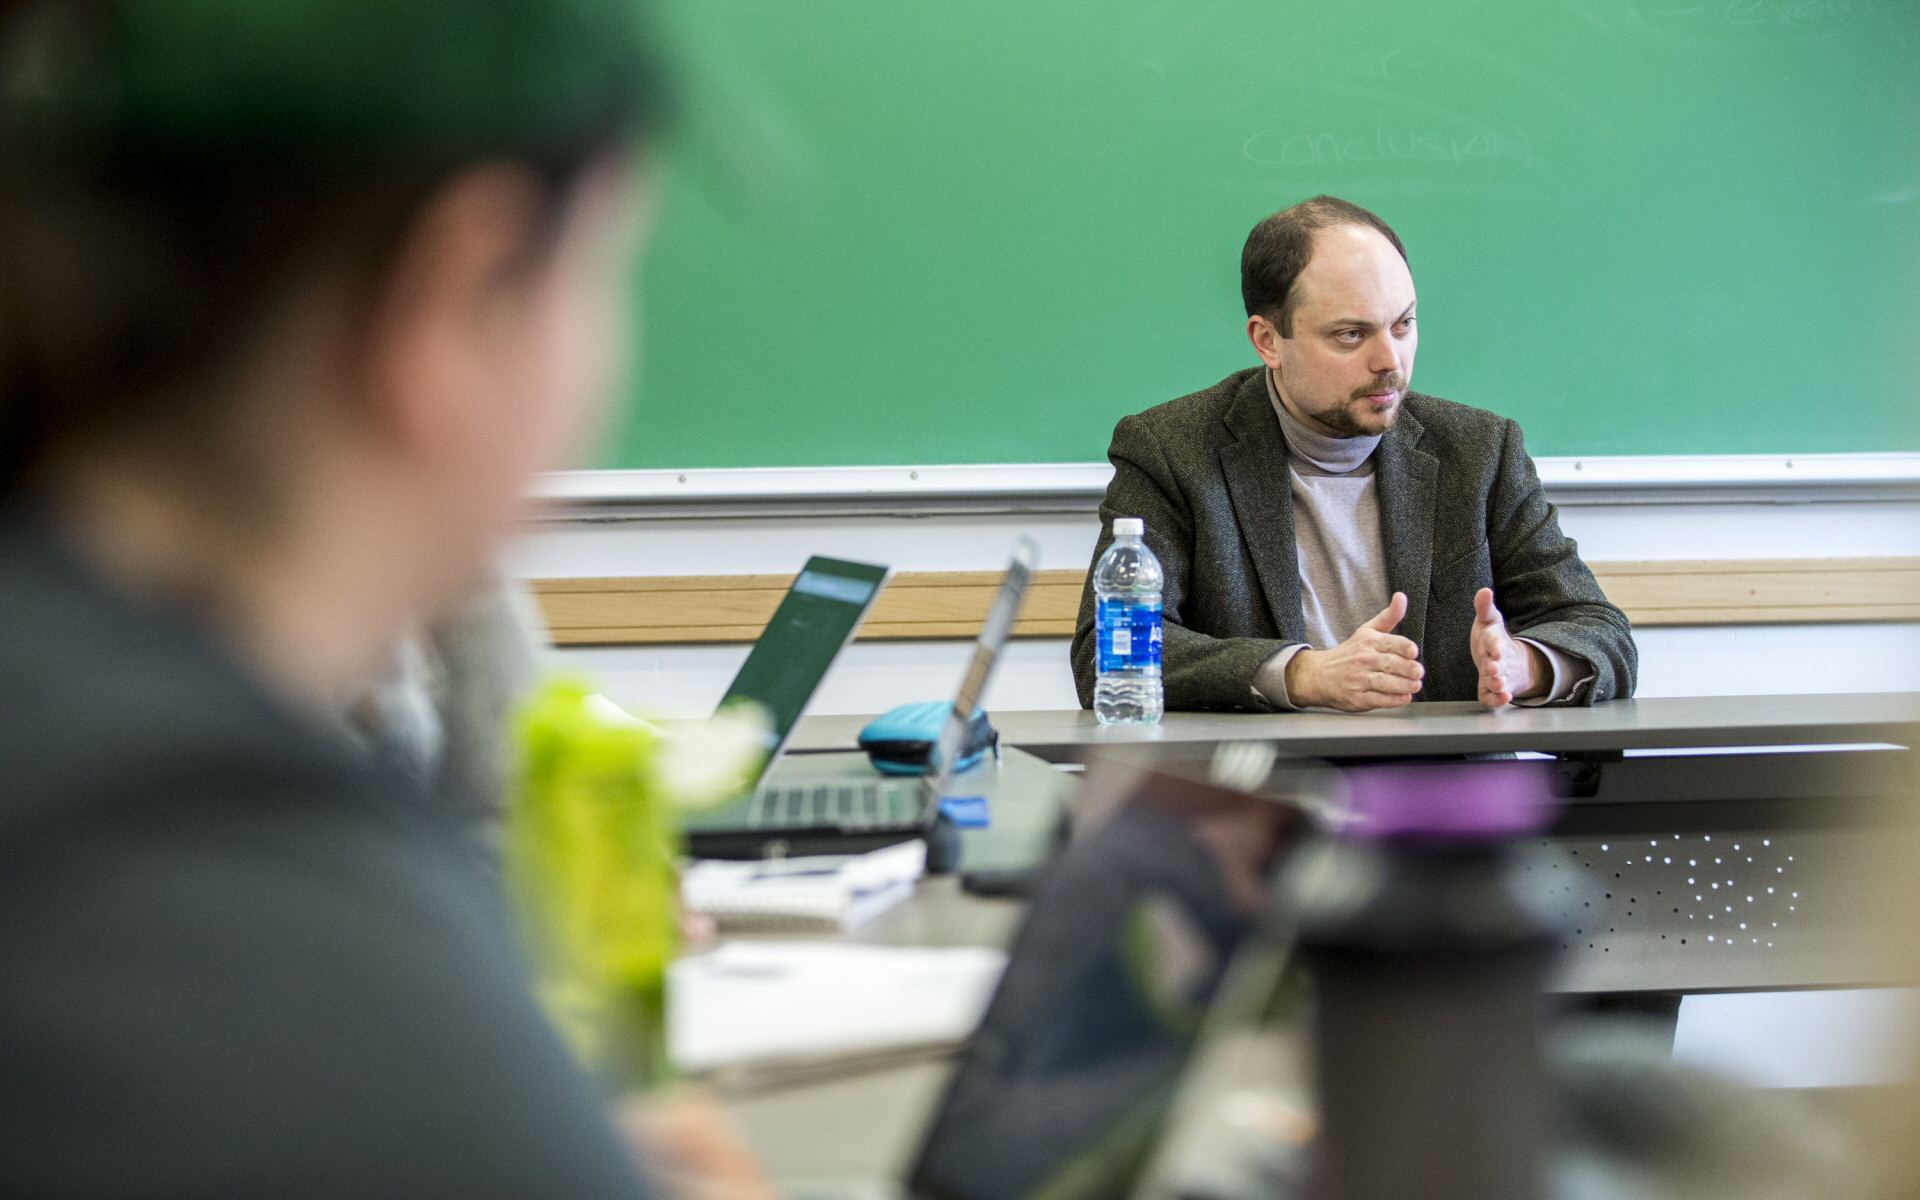 Russian documentarian-activitist talks to Skidmore students in a classroom